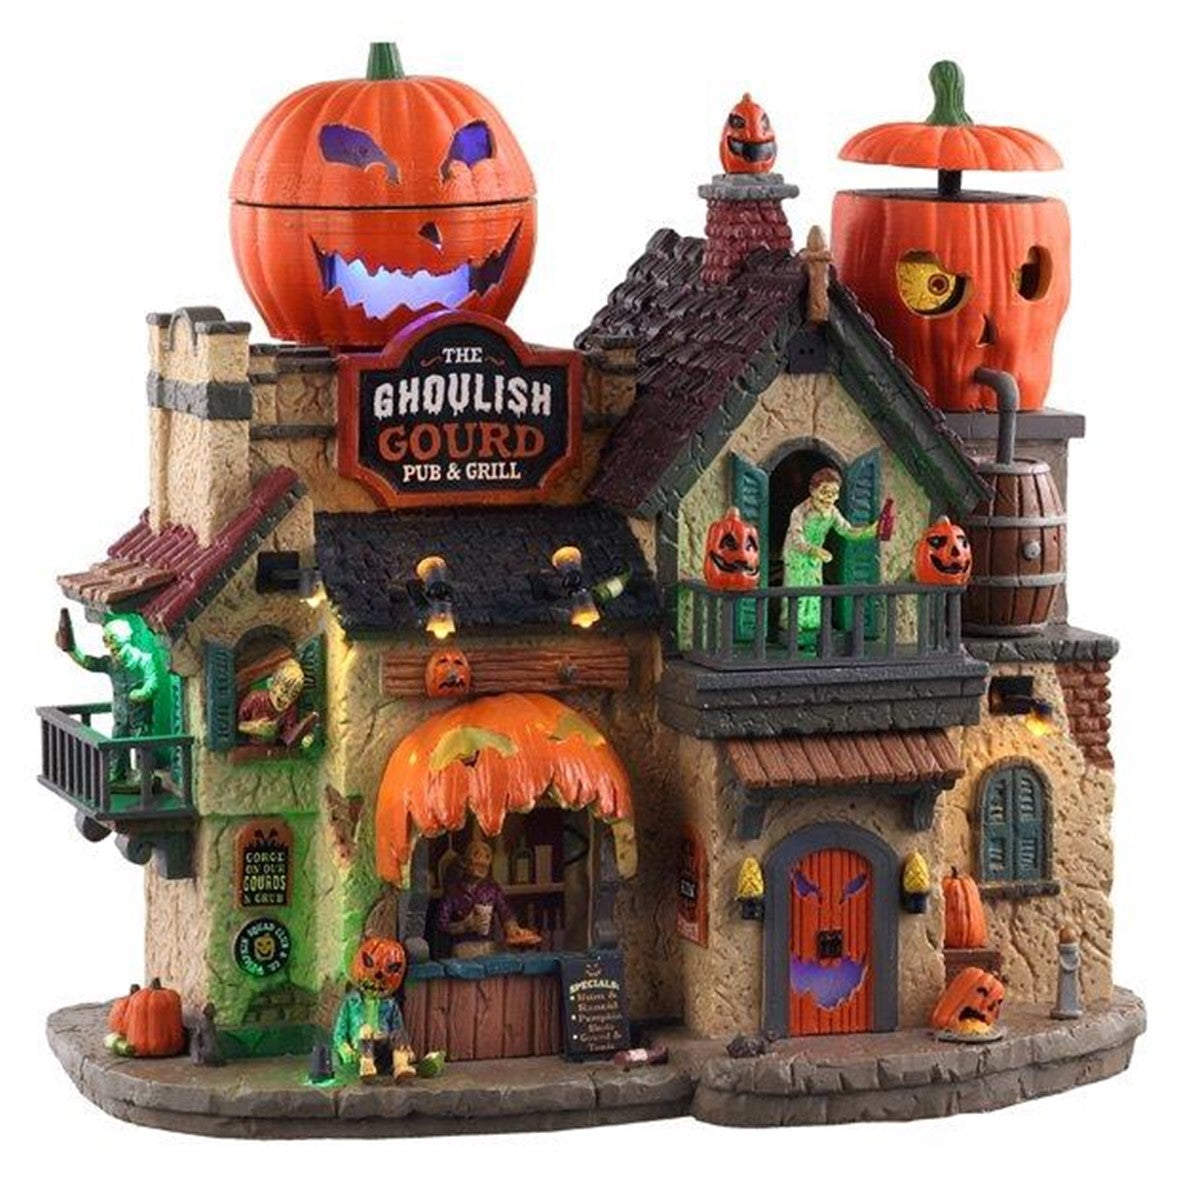 Lemax - The Ghoulish Gourd Pub & Grill